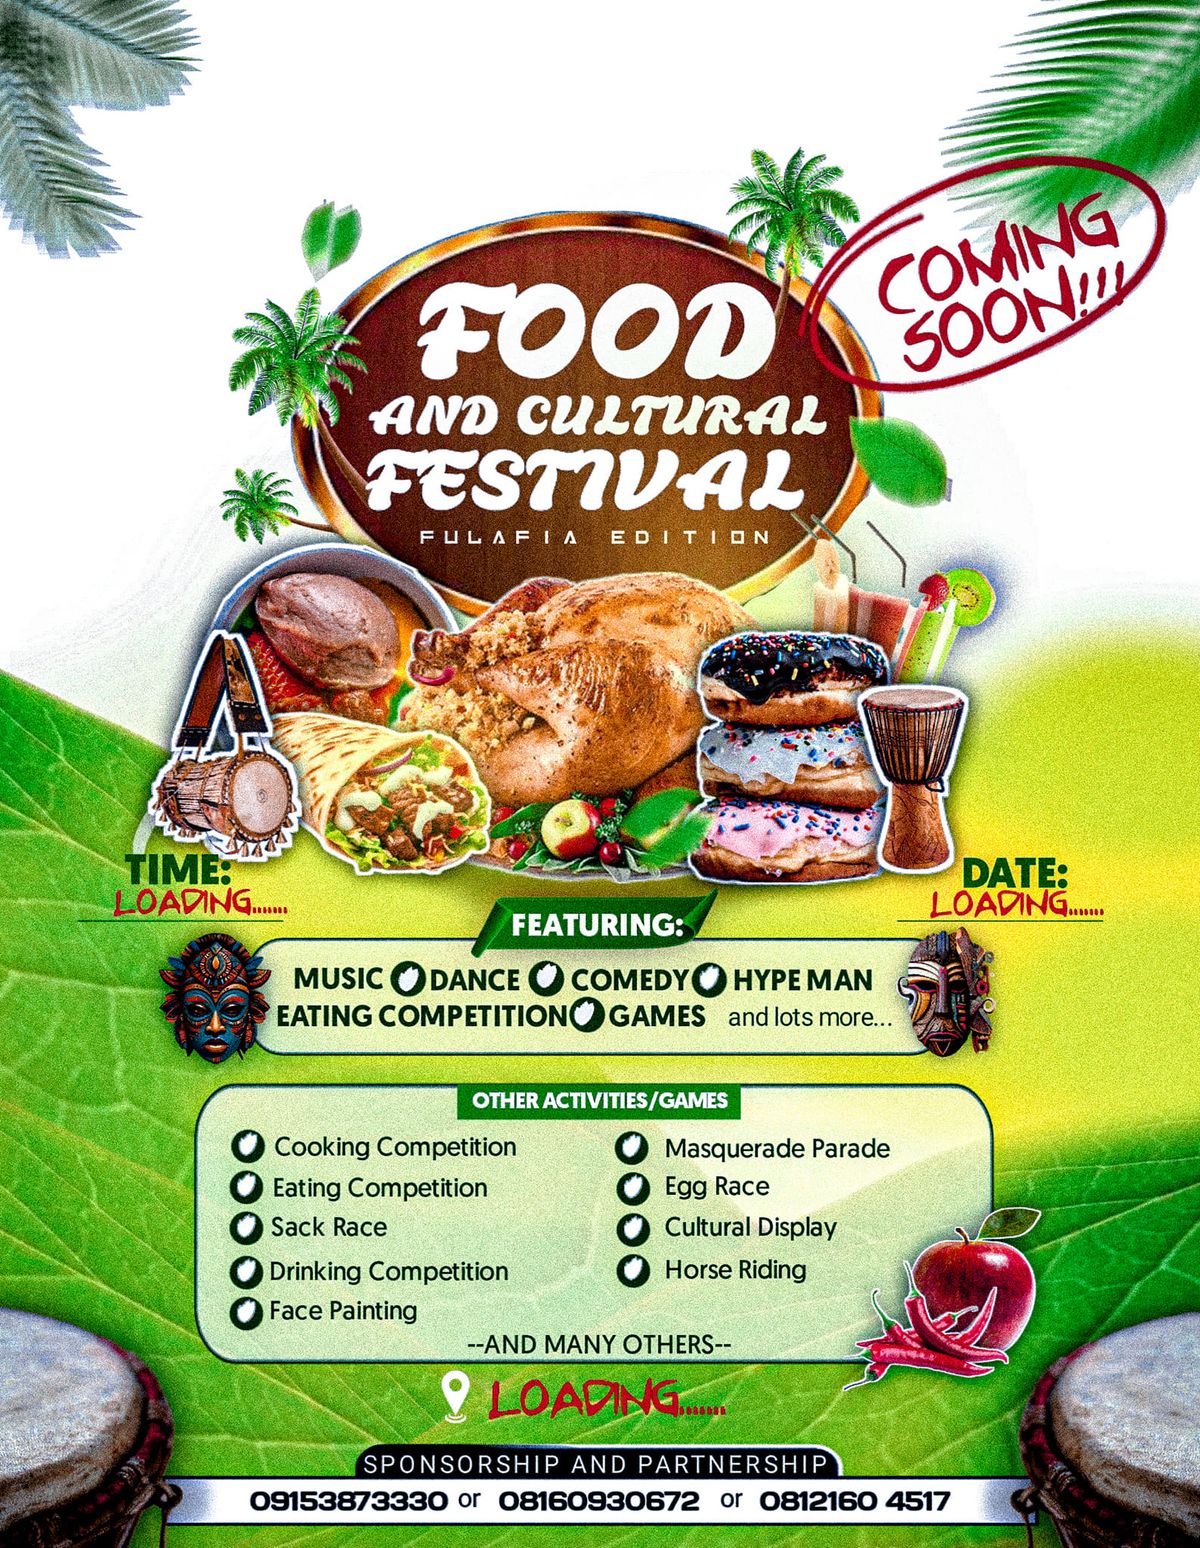 Food and cultural festival 